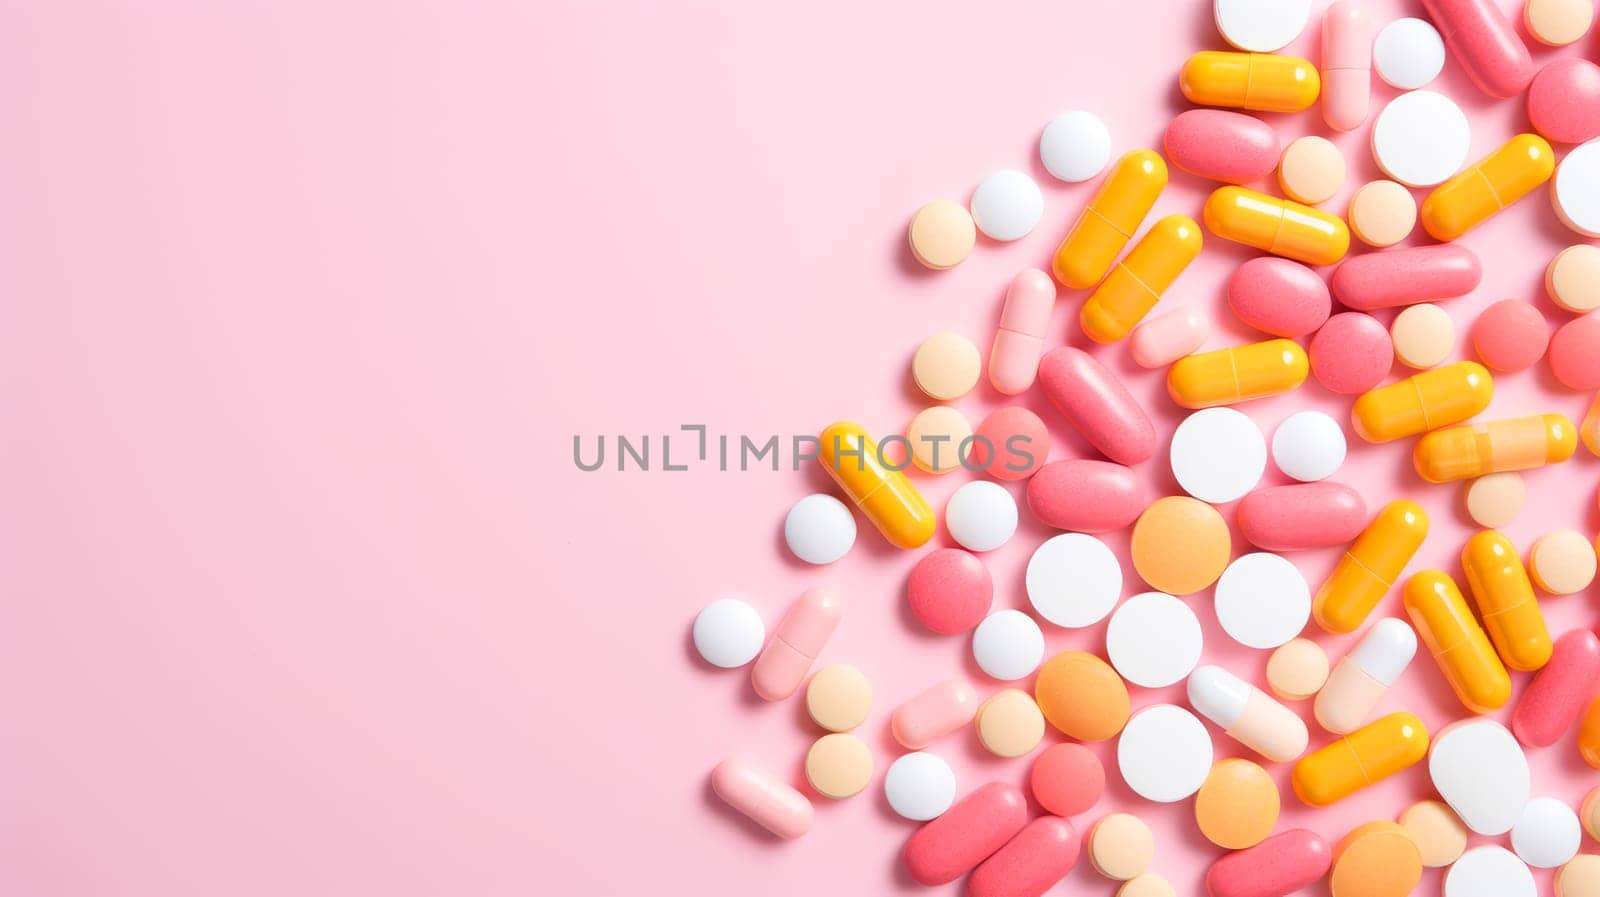 Multi-colored tablets, capsules and vitamins in a jar on a pink background. Medicine, treatment in a medical institution, healthy lifestyle, medical life insurance, pharmacies, pharmacy, treatment in a clinic.